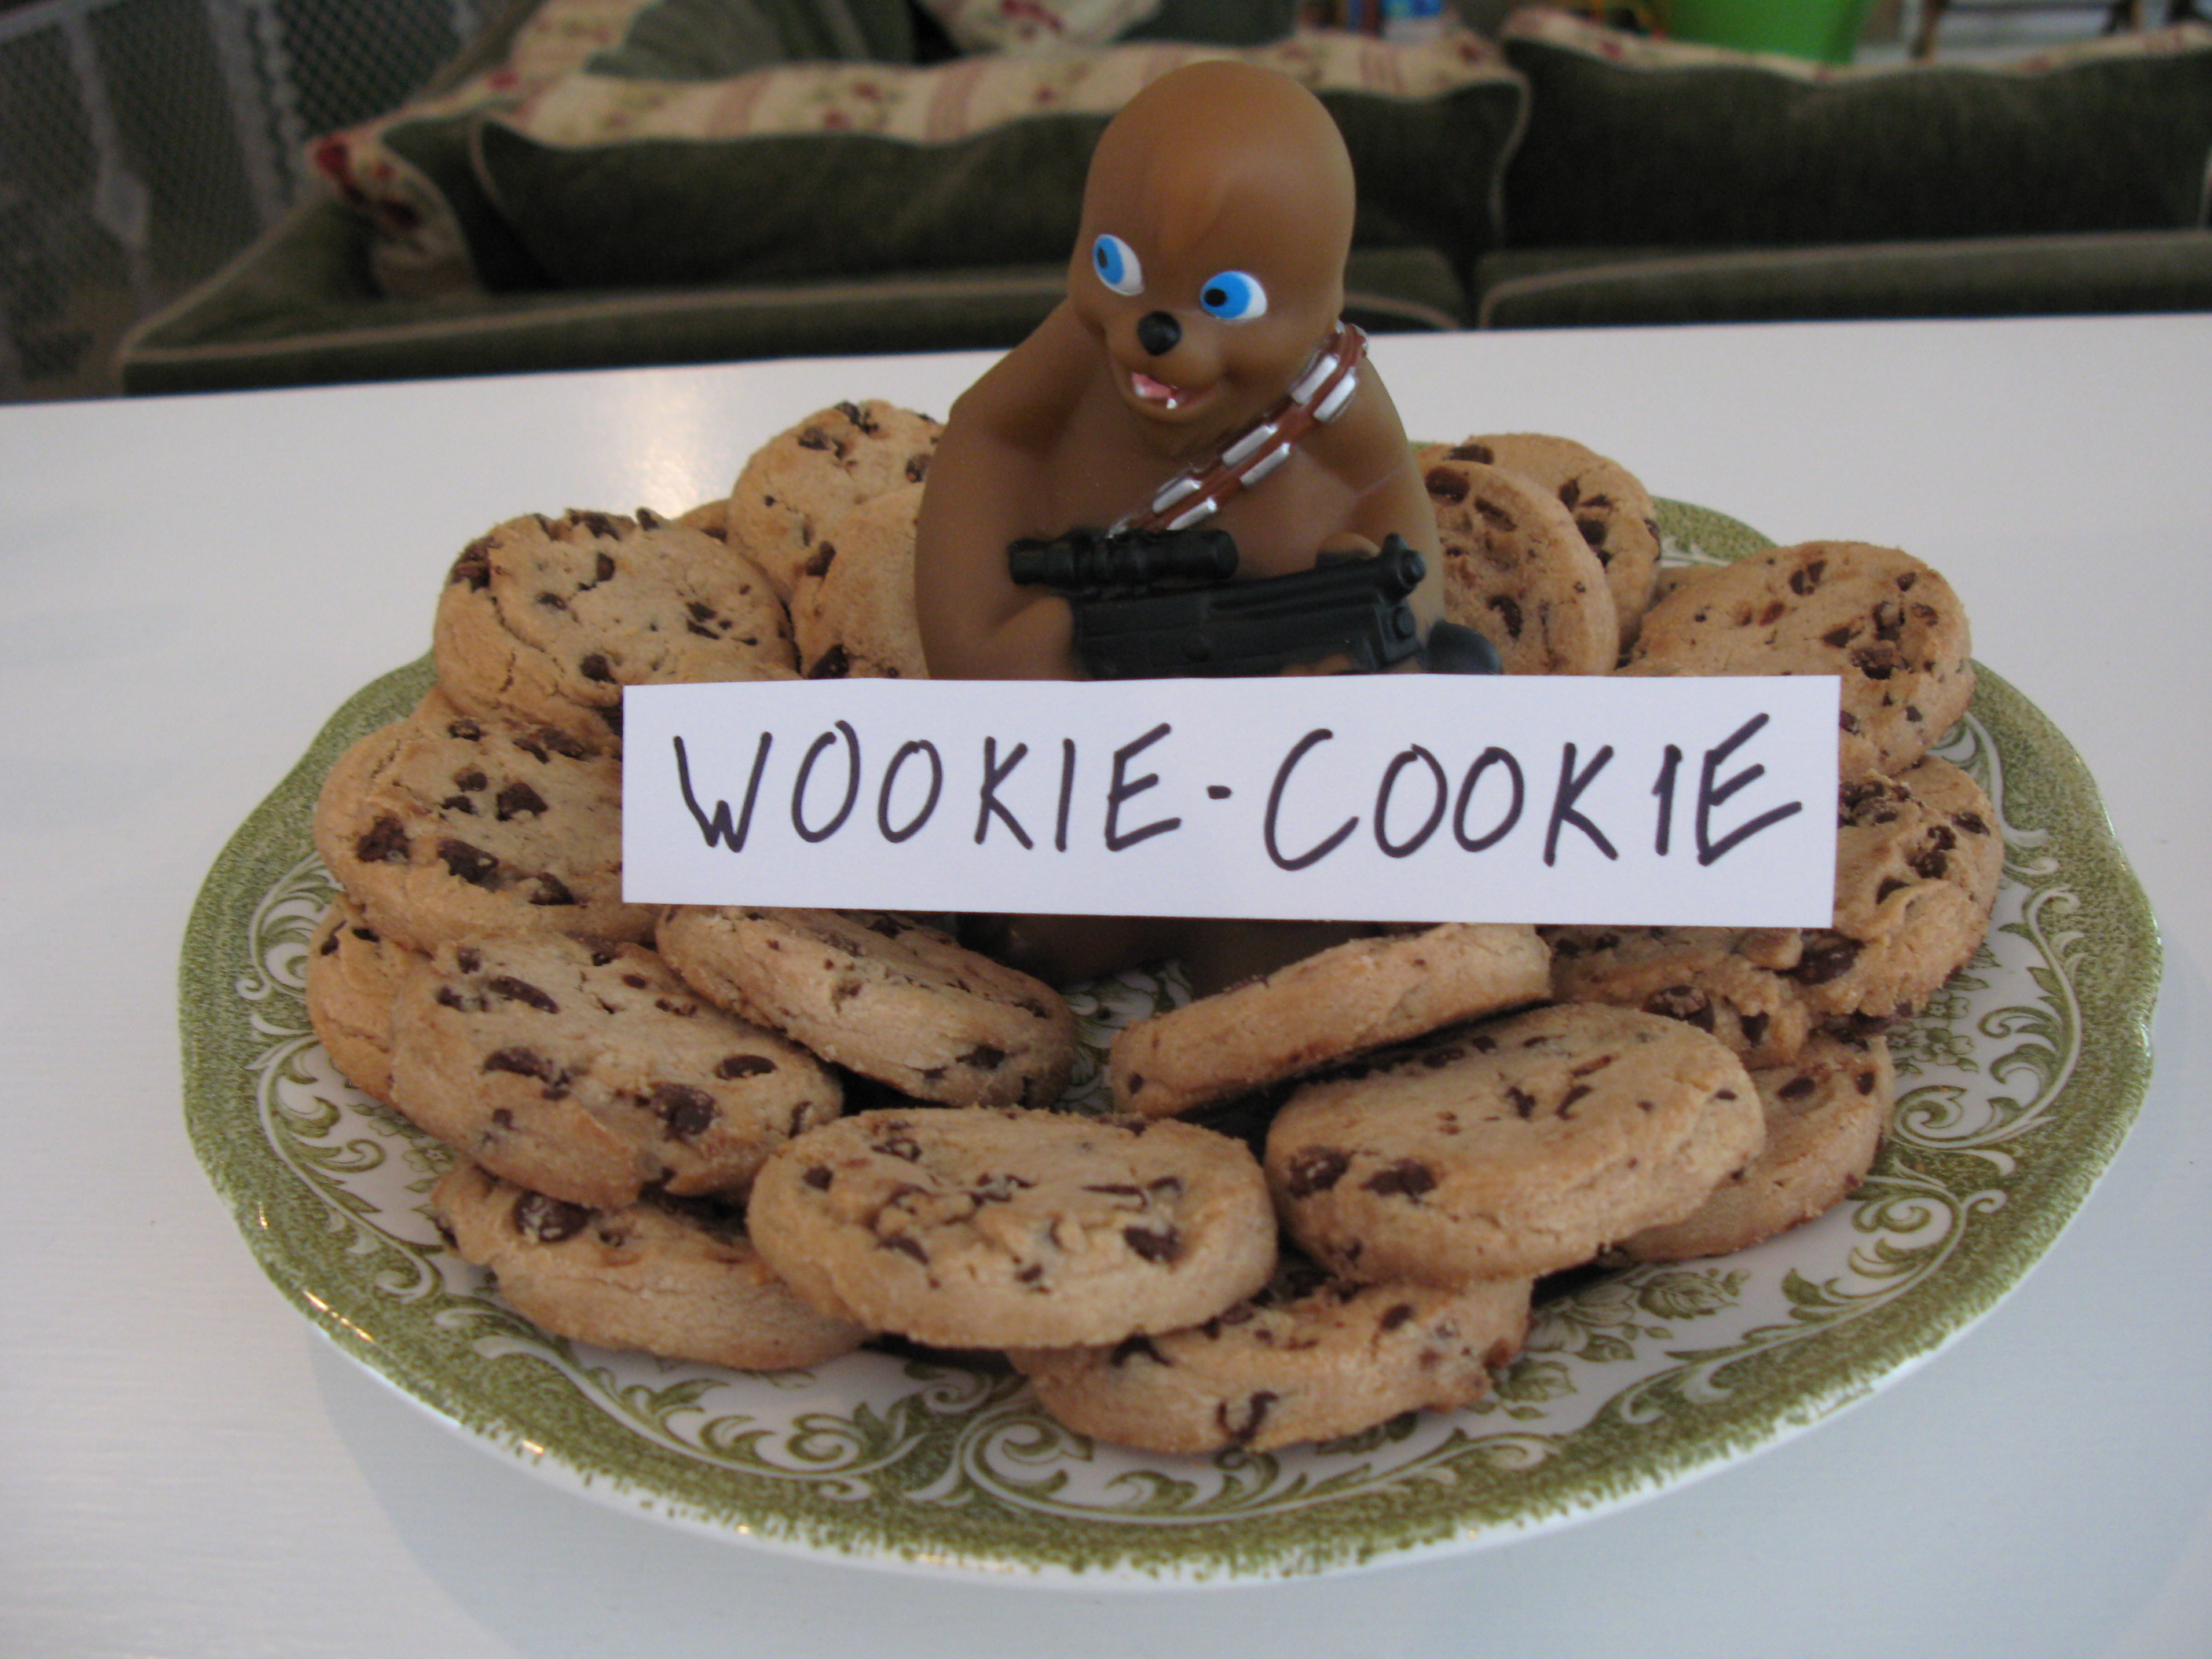 Who wouldn't want a "Wookie-Cookie"?